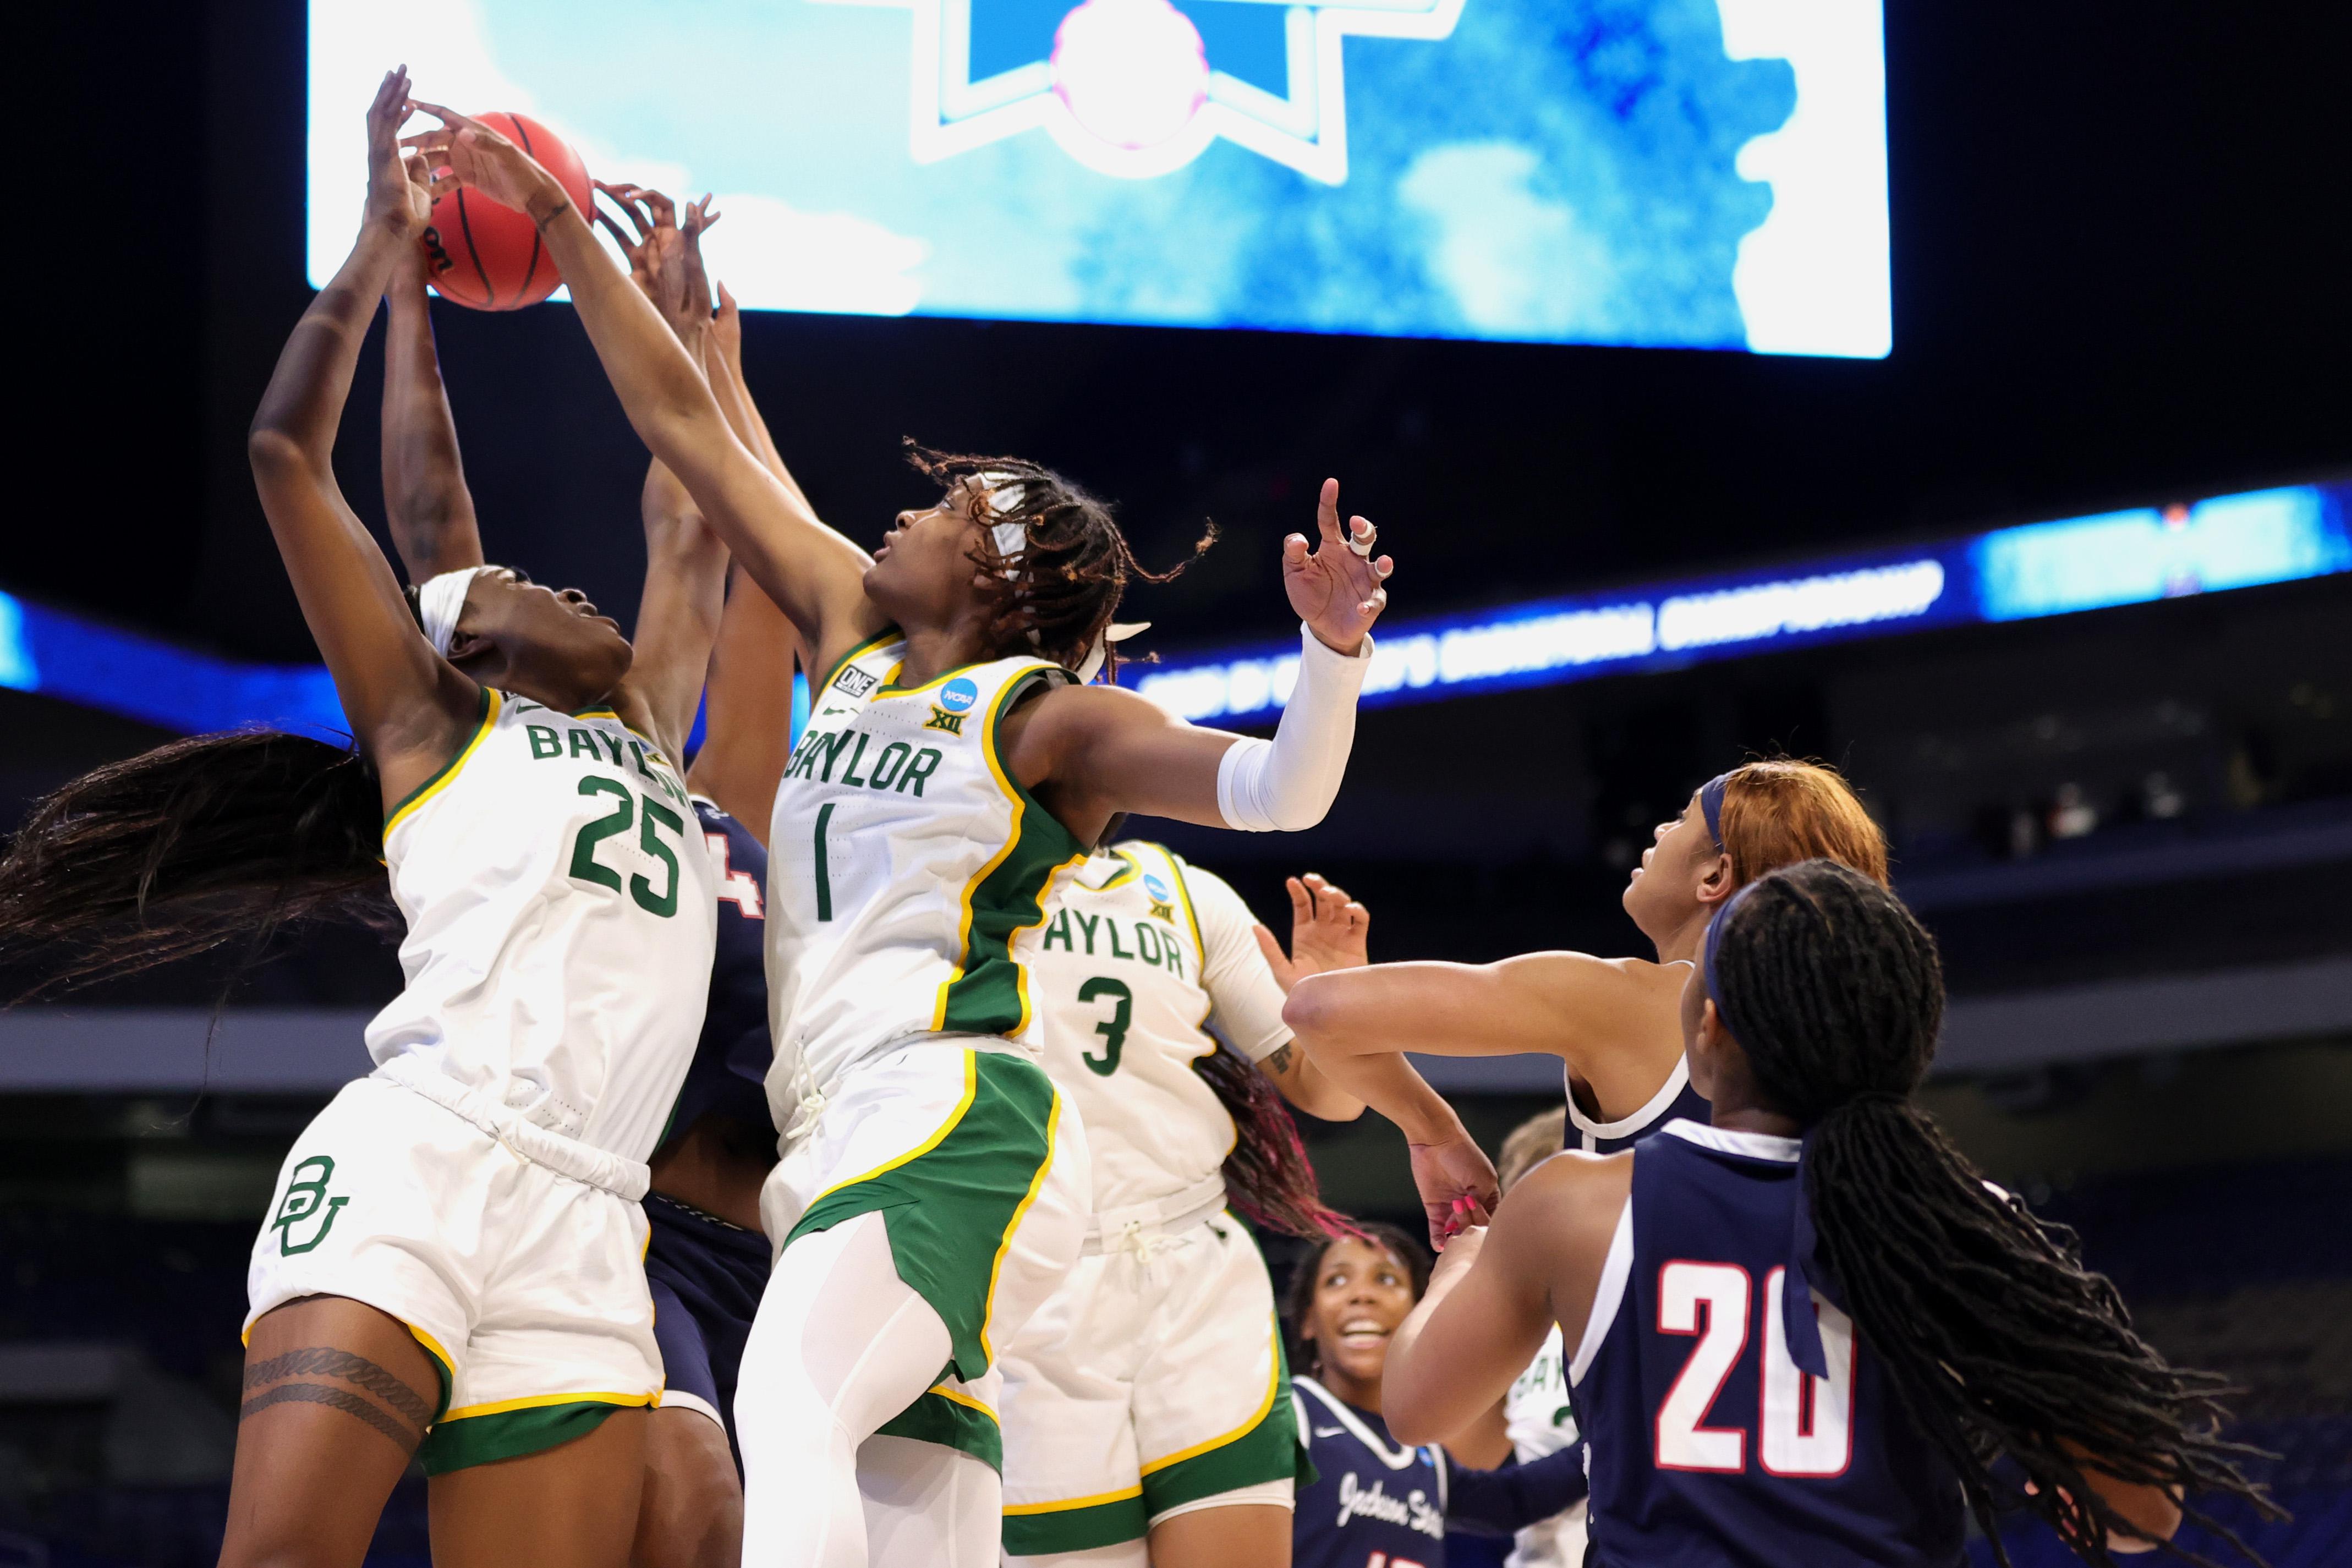 NCAA sexism, March Madness controversies, and college sports gender inequity.